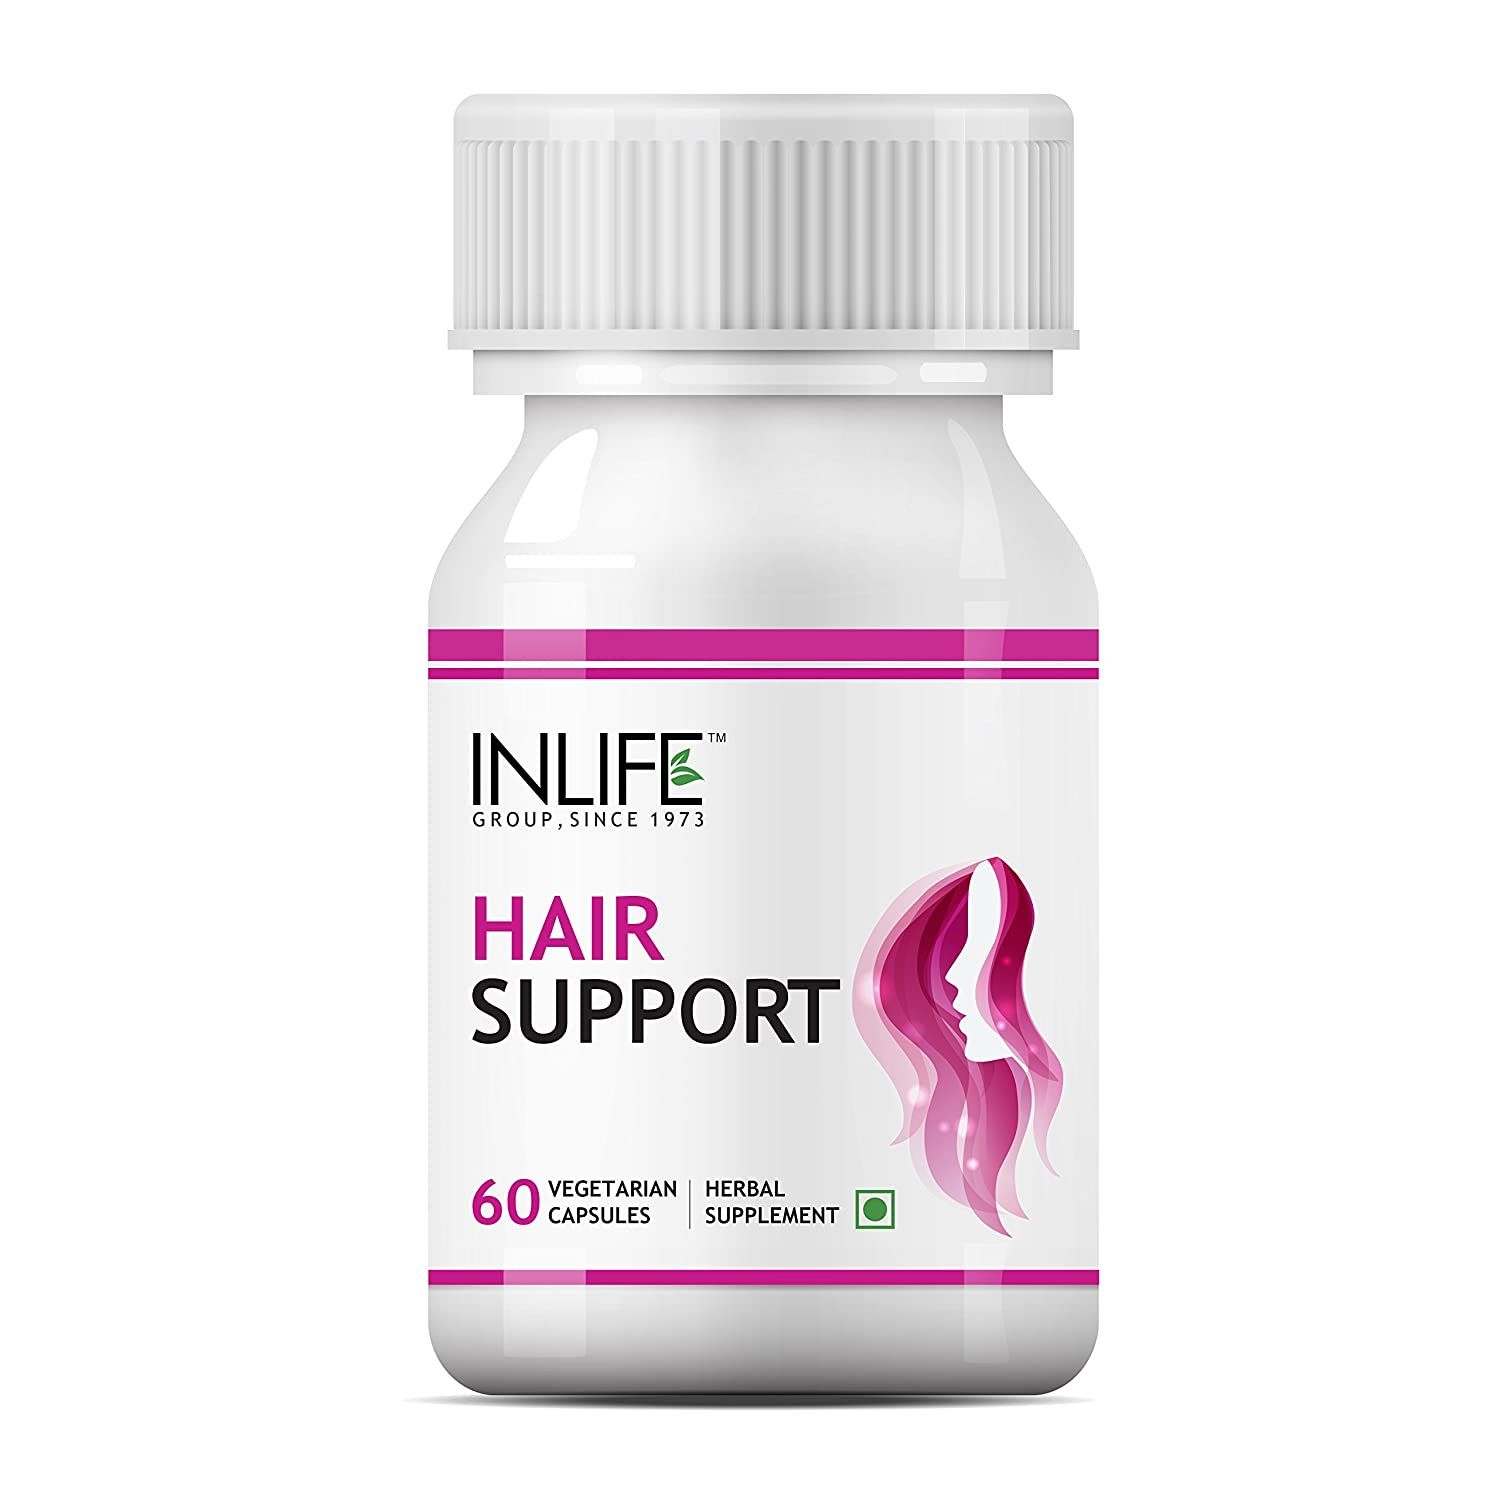 Inlife Hair Support Capsules Image